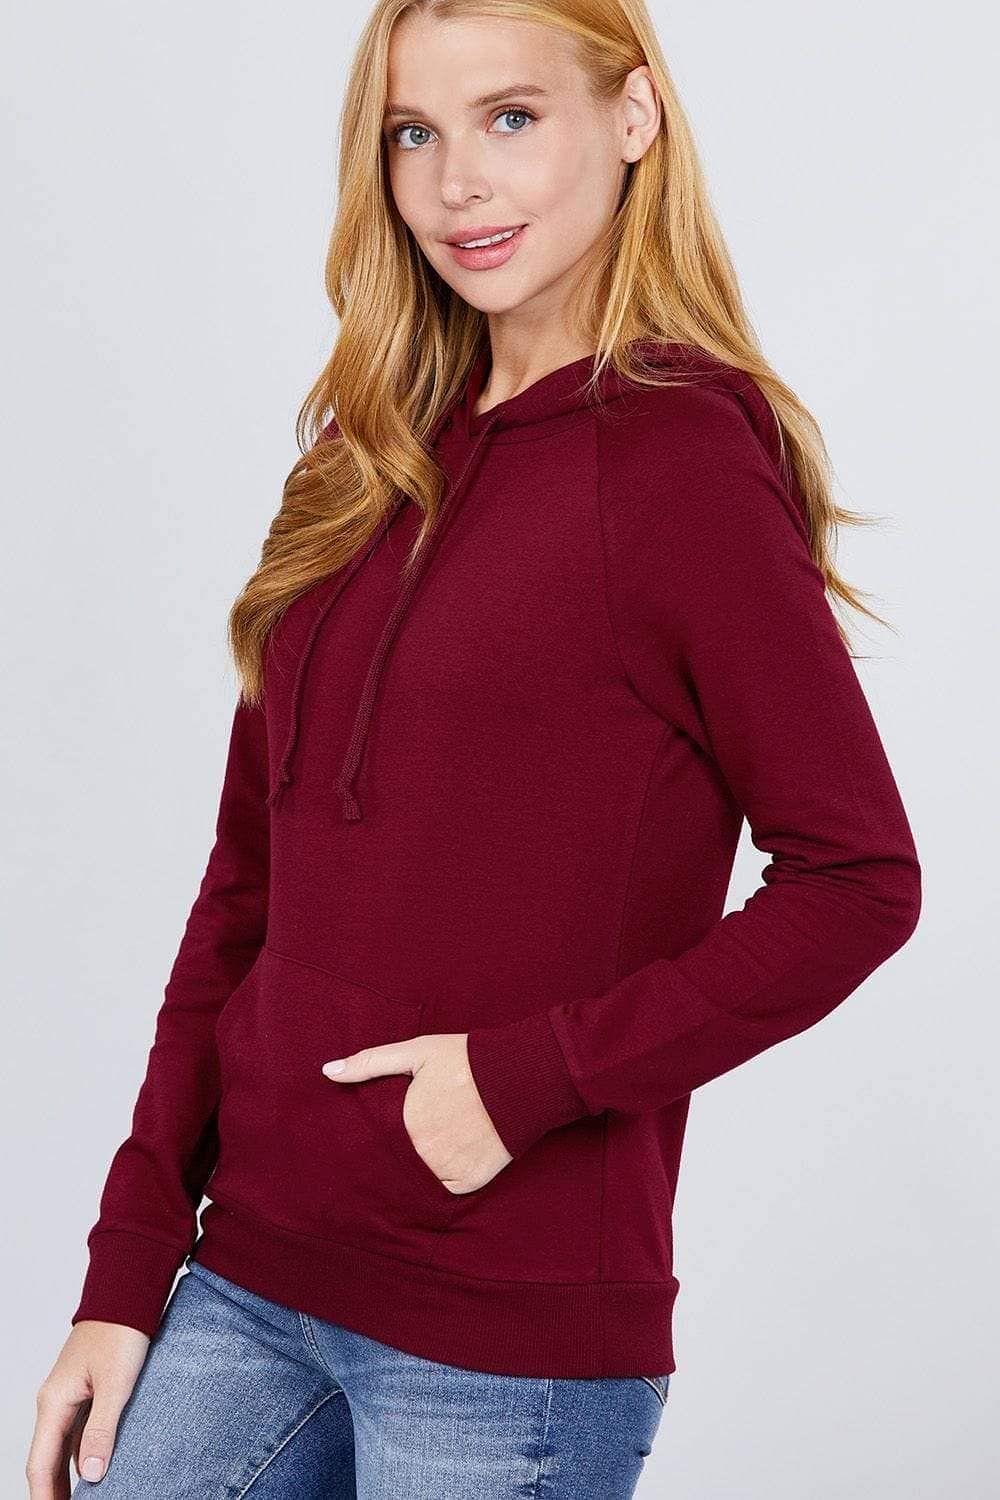 Wine Long Sleeve French Terry Sweatshirt - Shopping Therapy, LLC 